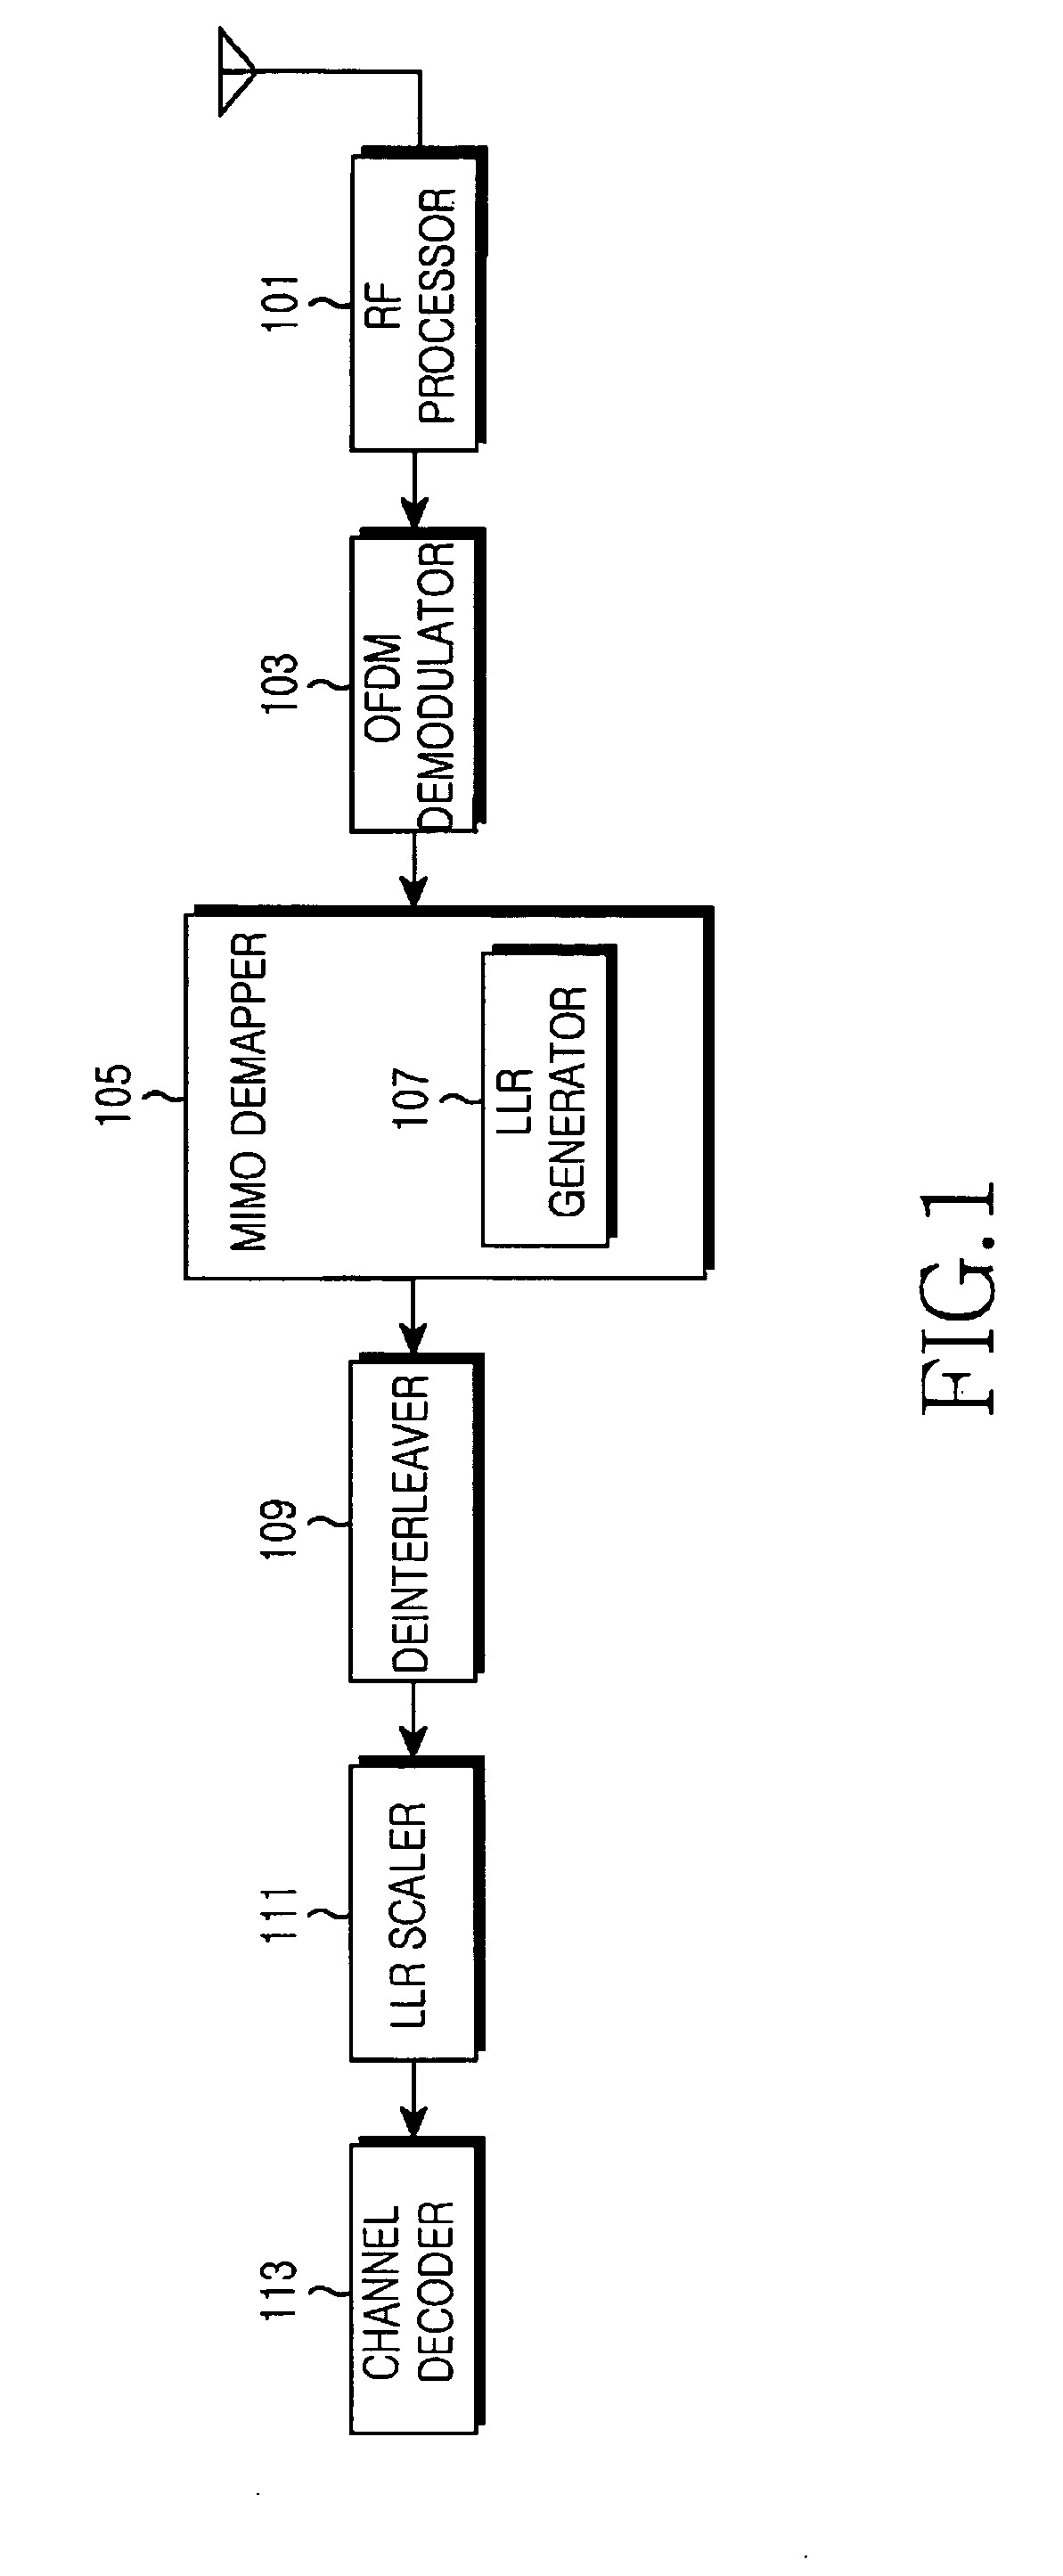 Apparatus and method for processing LLR for error correction code in a mobile communication system